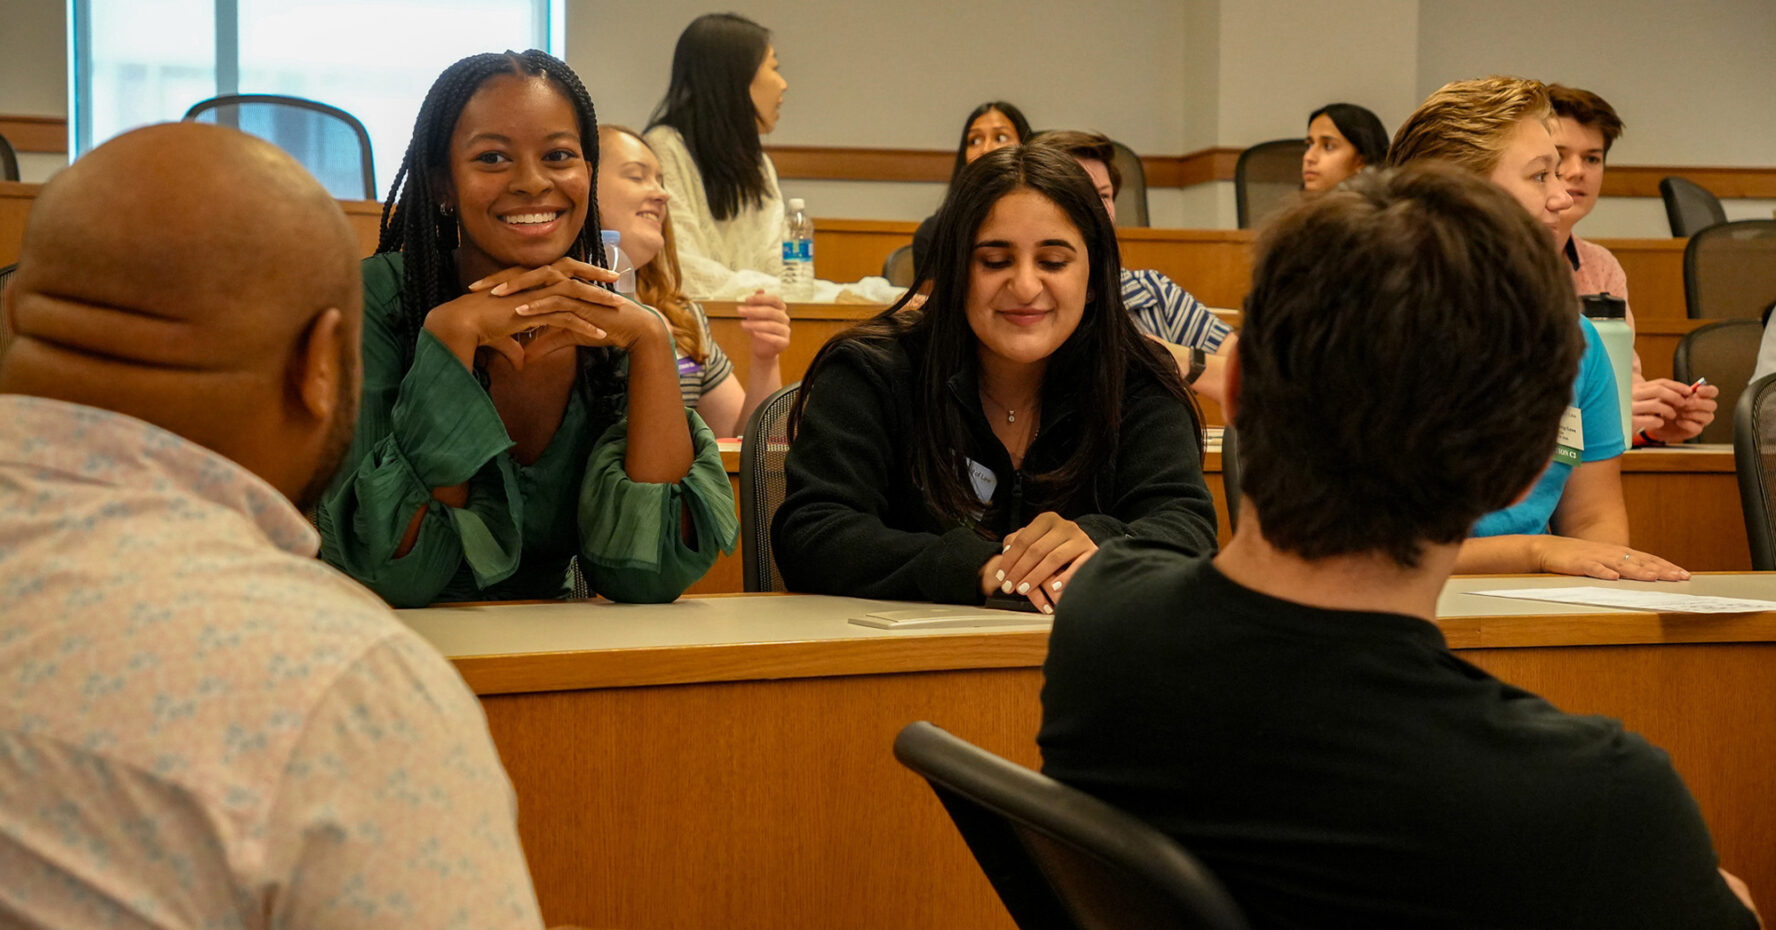 Two smiling students sit in a lecture hall conversing with others.